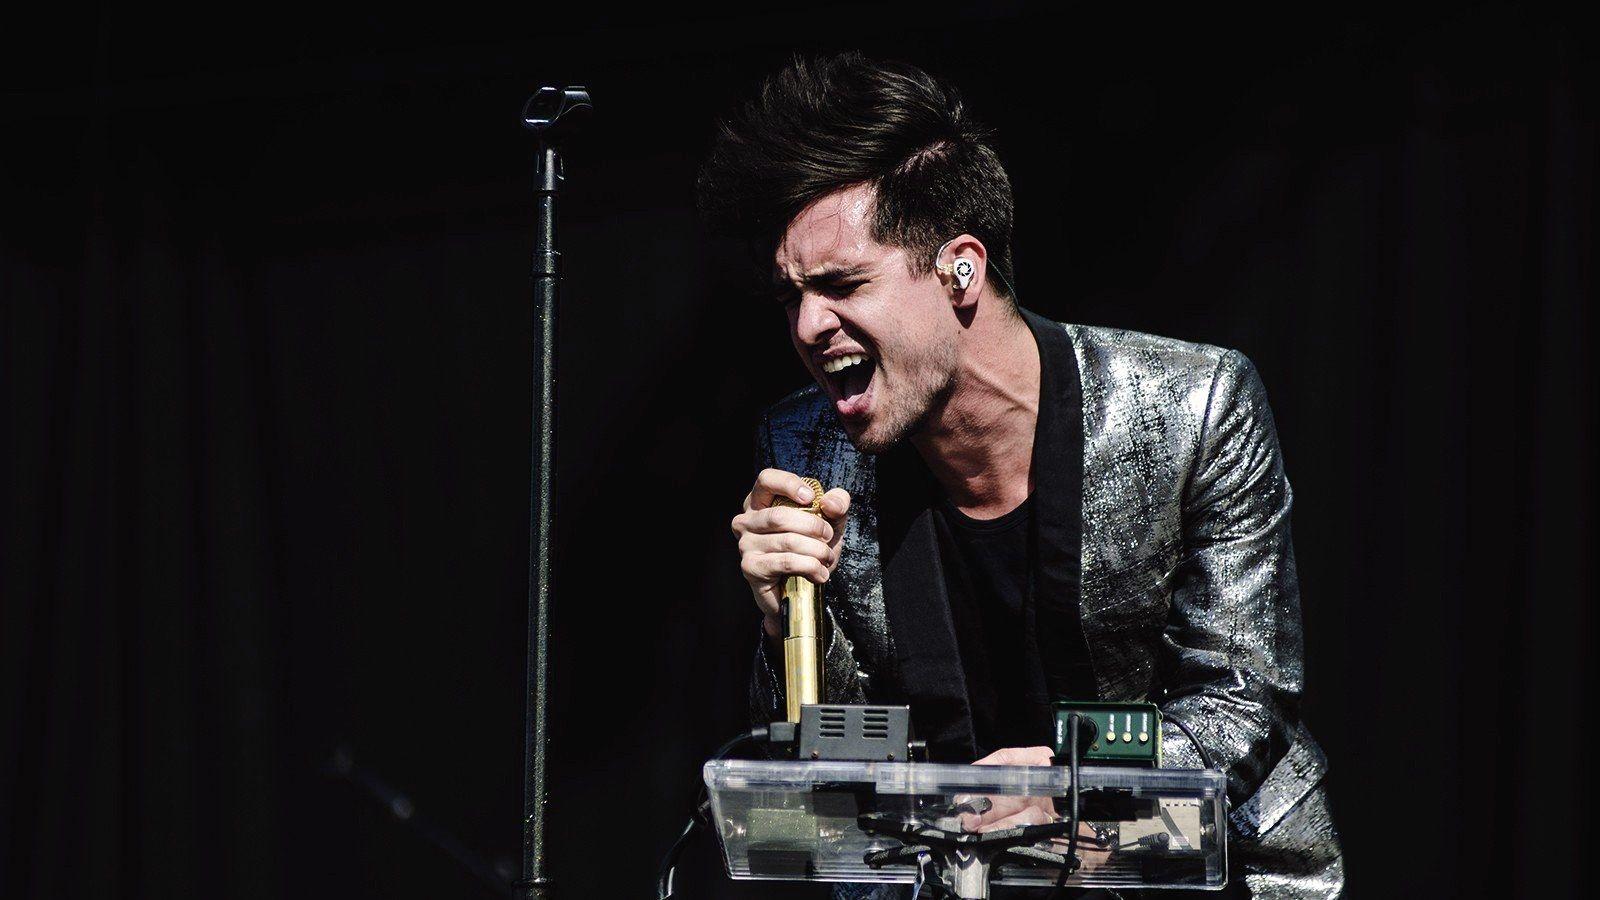 Watch Brendon Urie reimagine Panic! At The Disco's hits